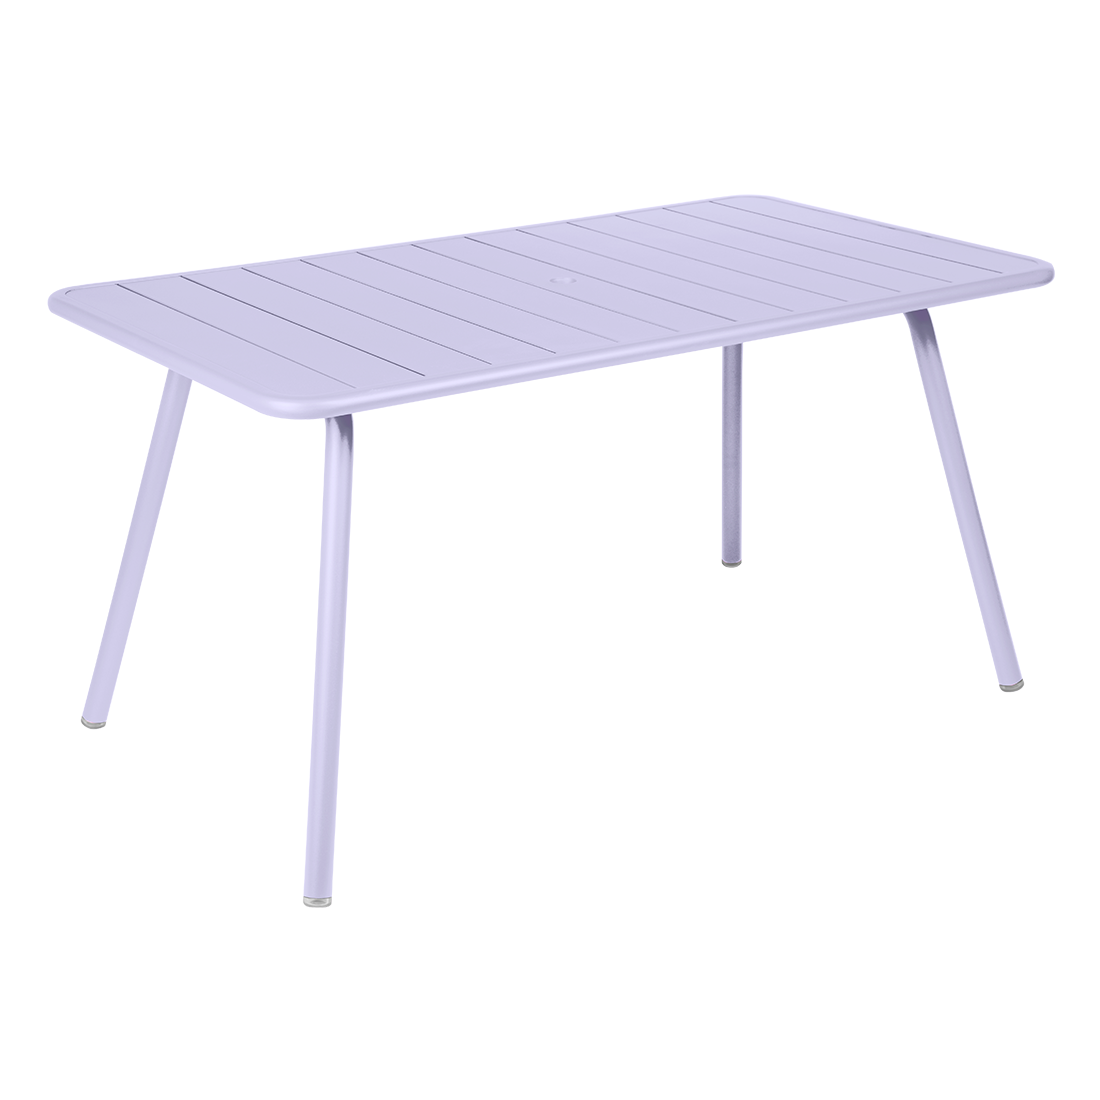 LUXEMBOURG TABLE 143 X 80 CM